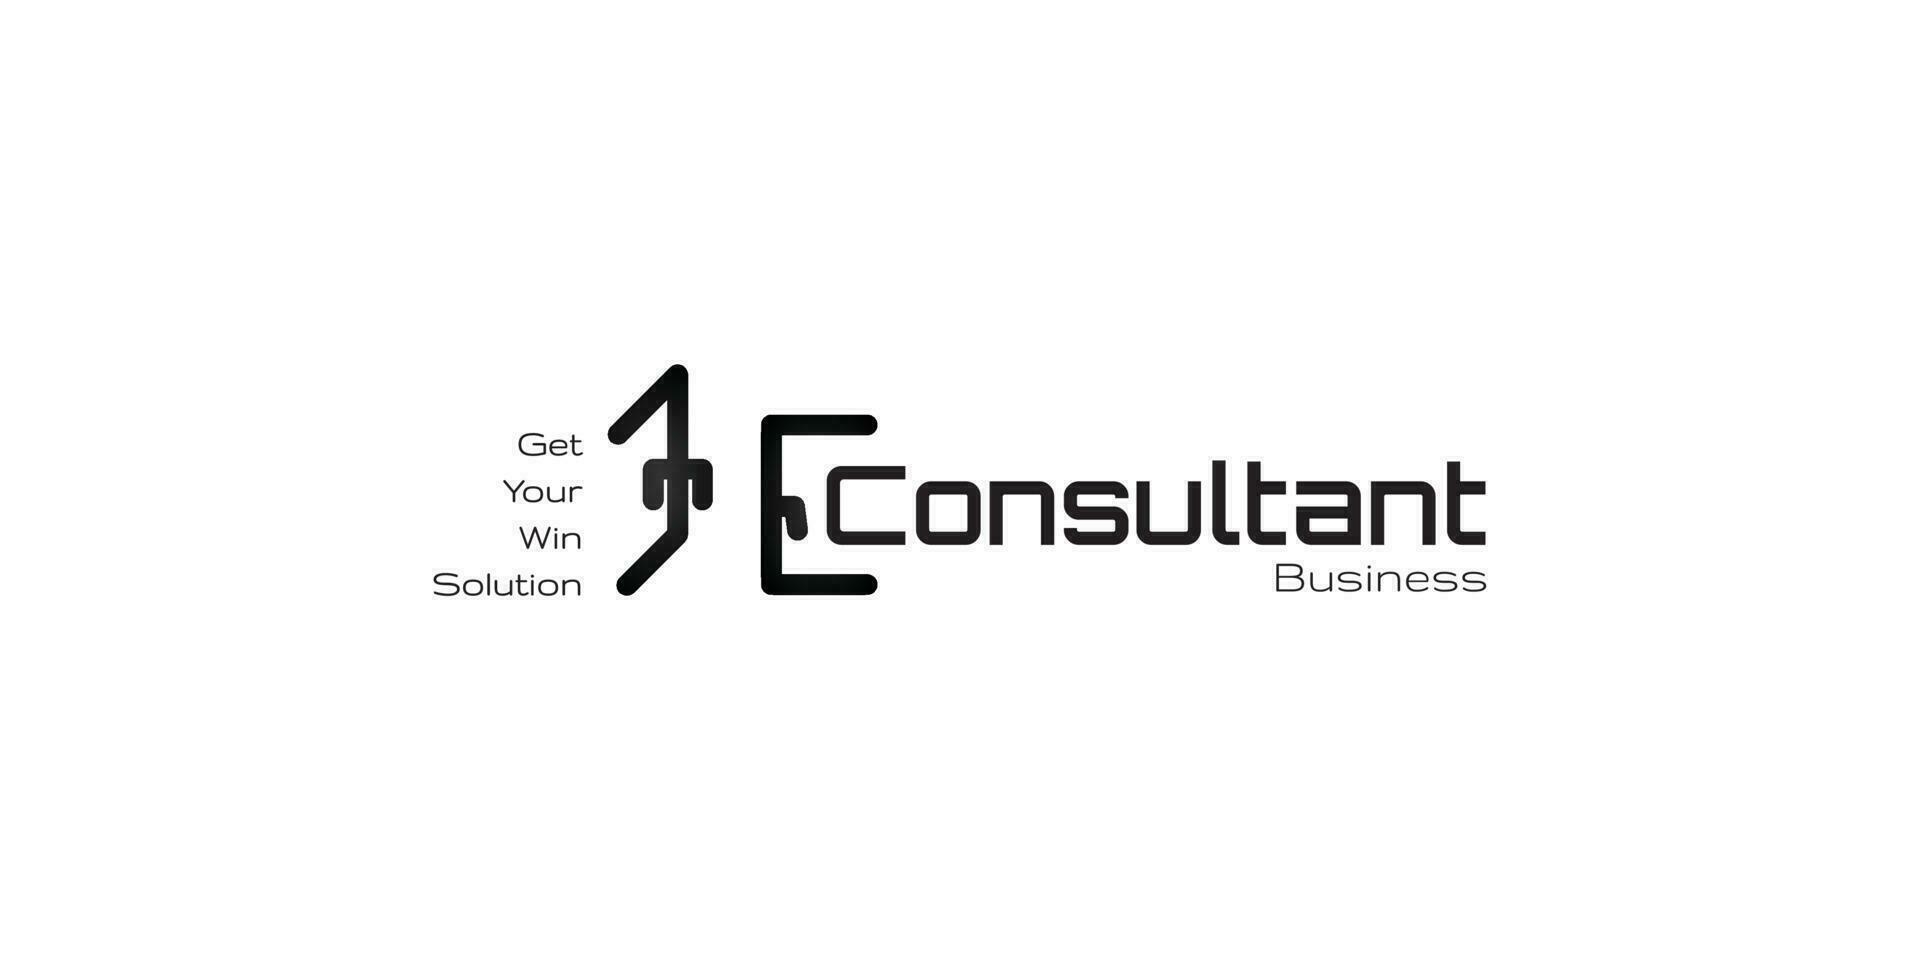 consultant business logo design, get your win solution vector